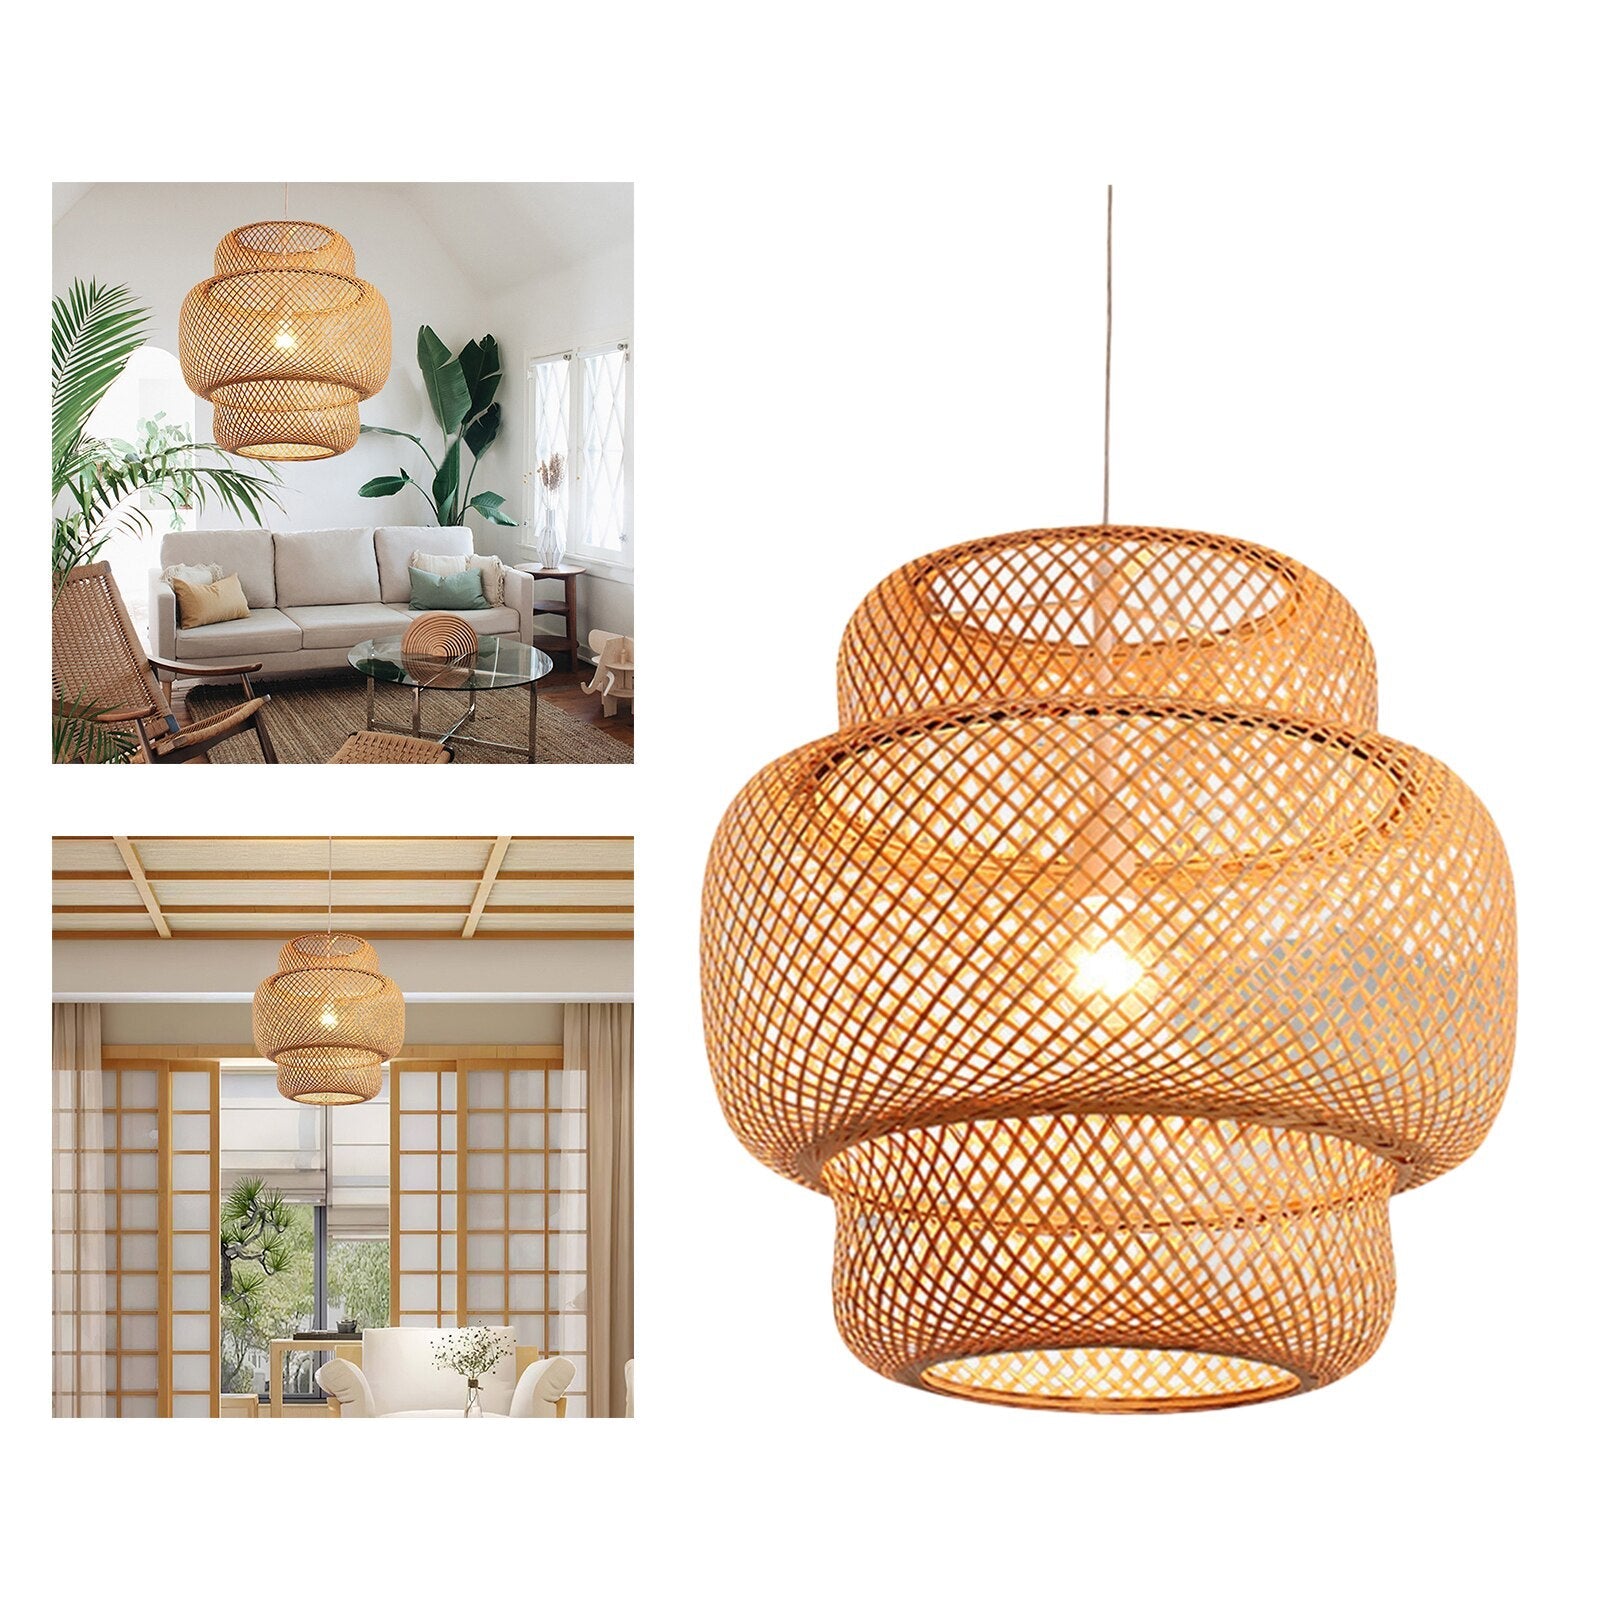 Woven Chandelier-  Bambo Handmade Zen Decor Ideas - Personal Hour for Yoga and Meditations 